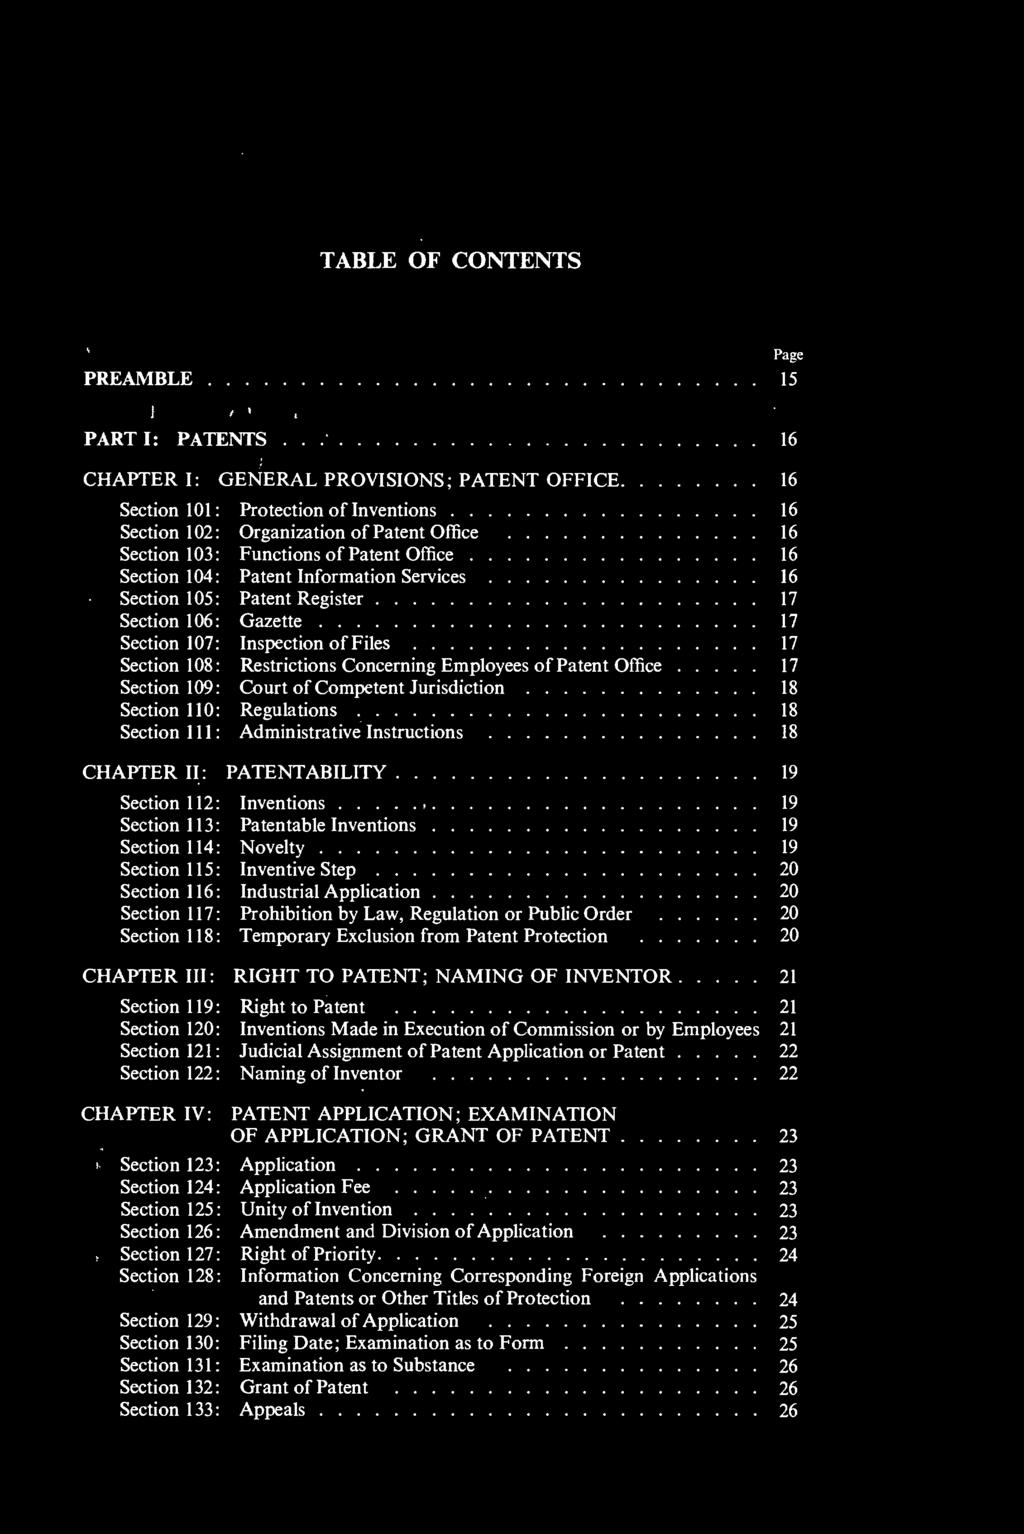 TABLE OF CONTENTS PREAMBLE Page 15 PART I: PATENTS 16 CHAPTER I: Section 101 Section 102 Section 103 Section 104 Section 105 Section 106 Section 107 Section 108 Section 109 Section 110 Section 111